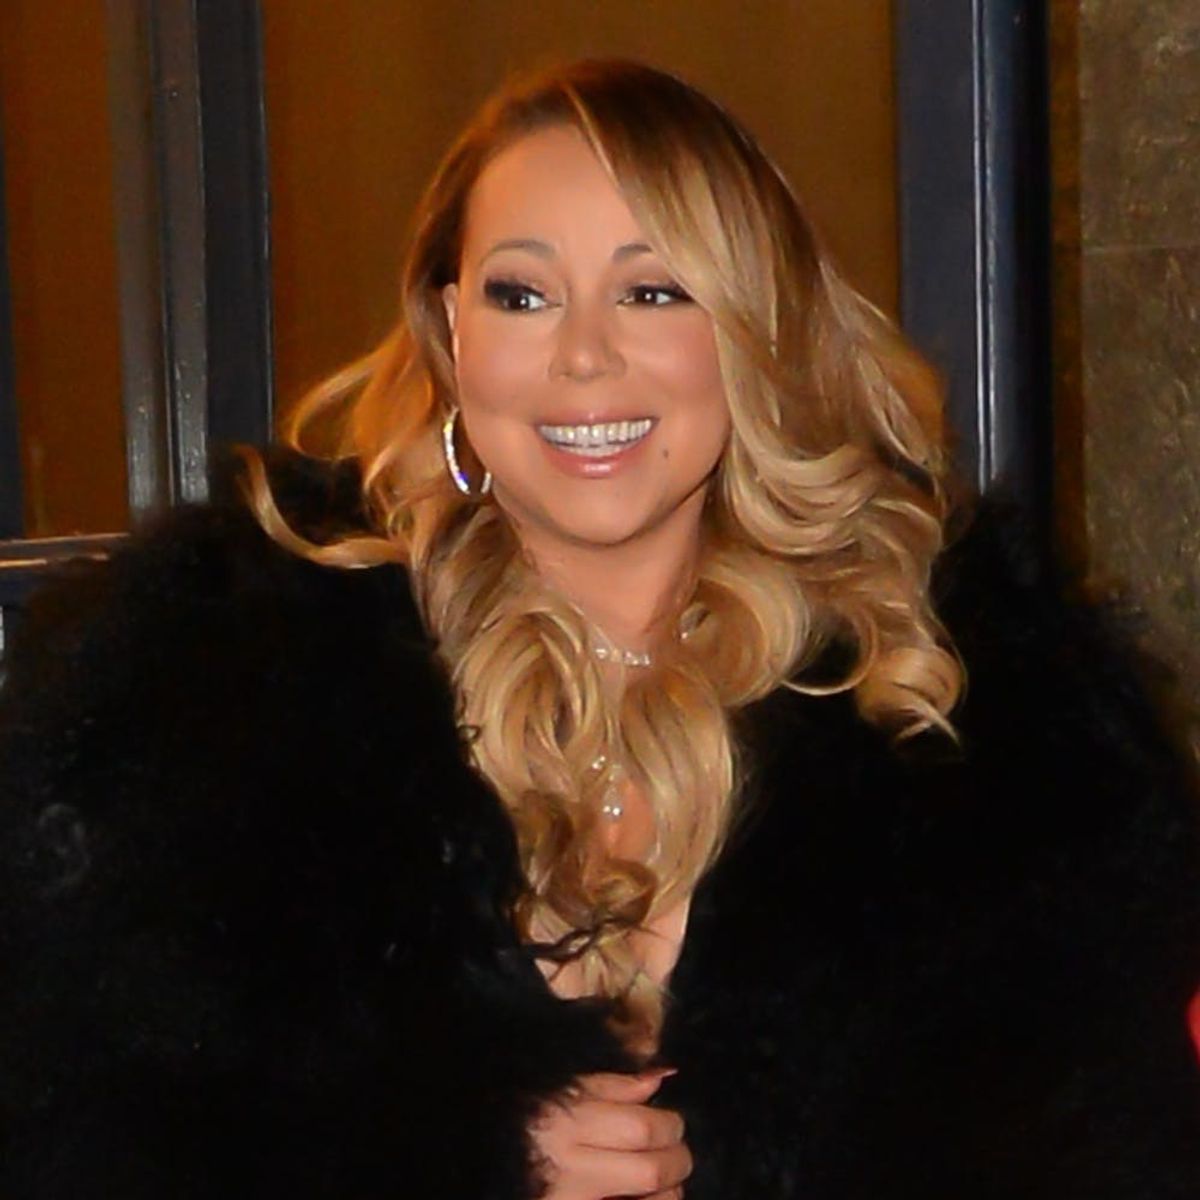 Mariah Carey Is Still Wearing Her $10 Million Engagement Ring Post-Breakup